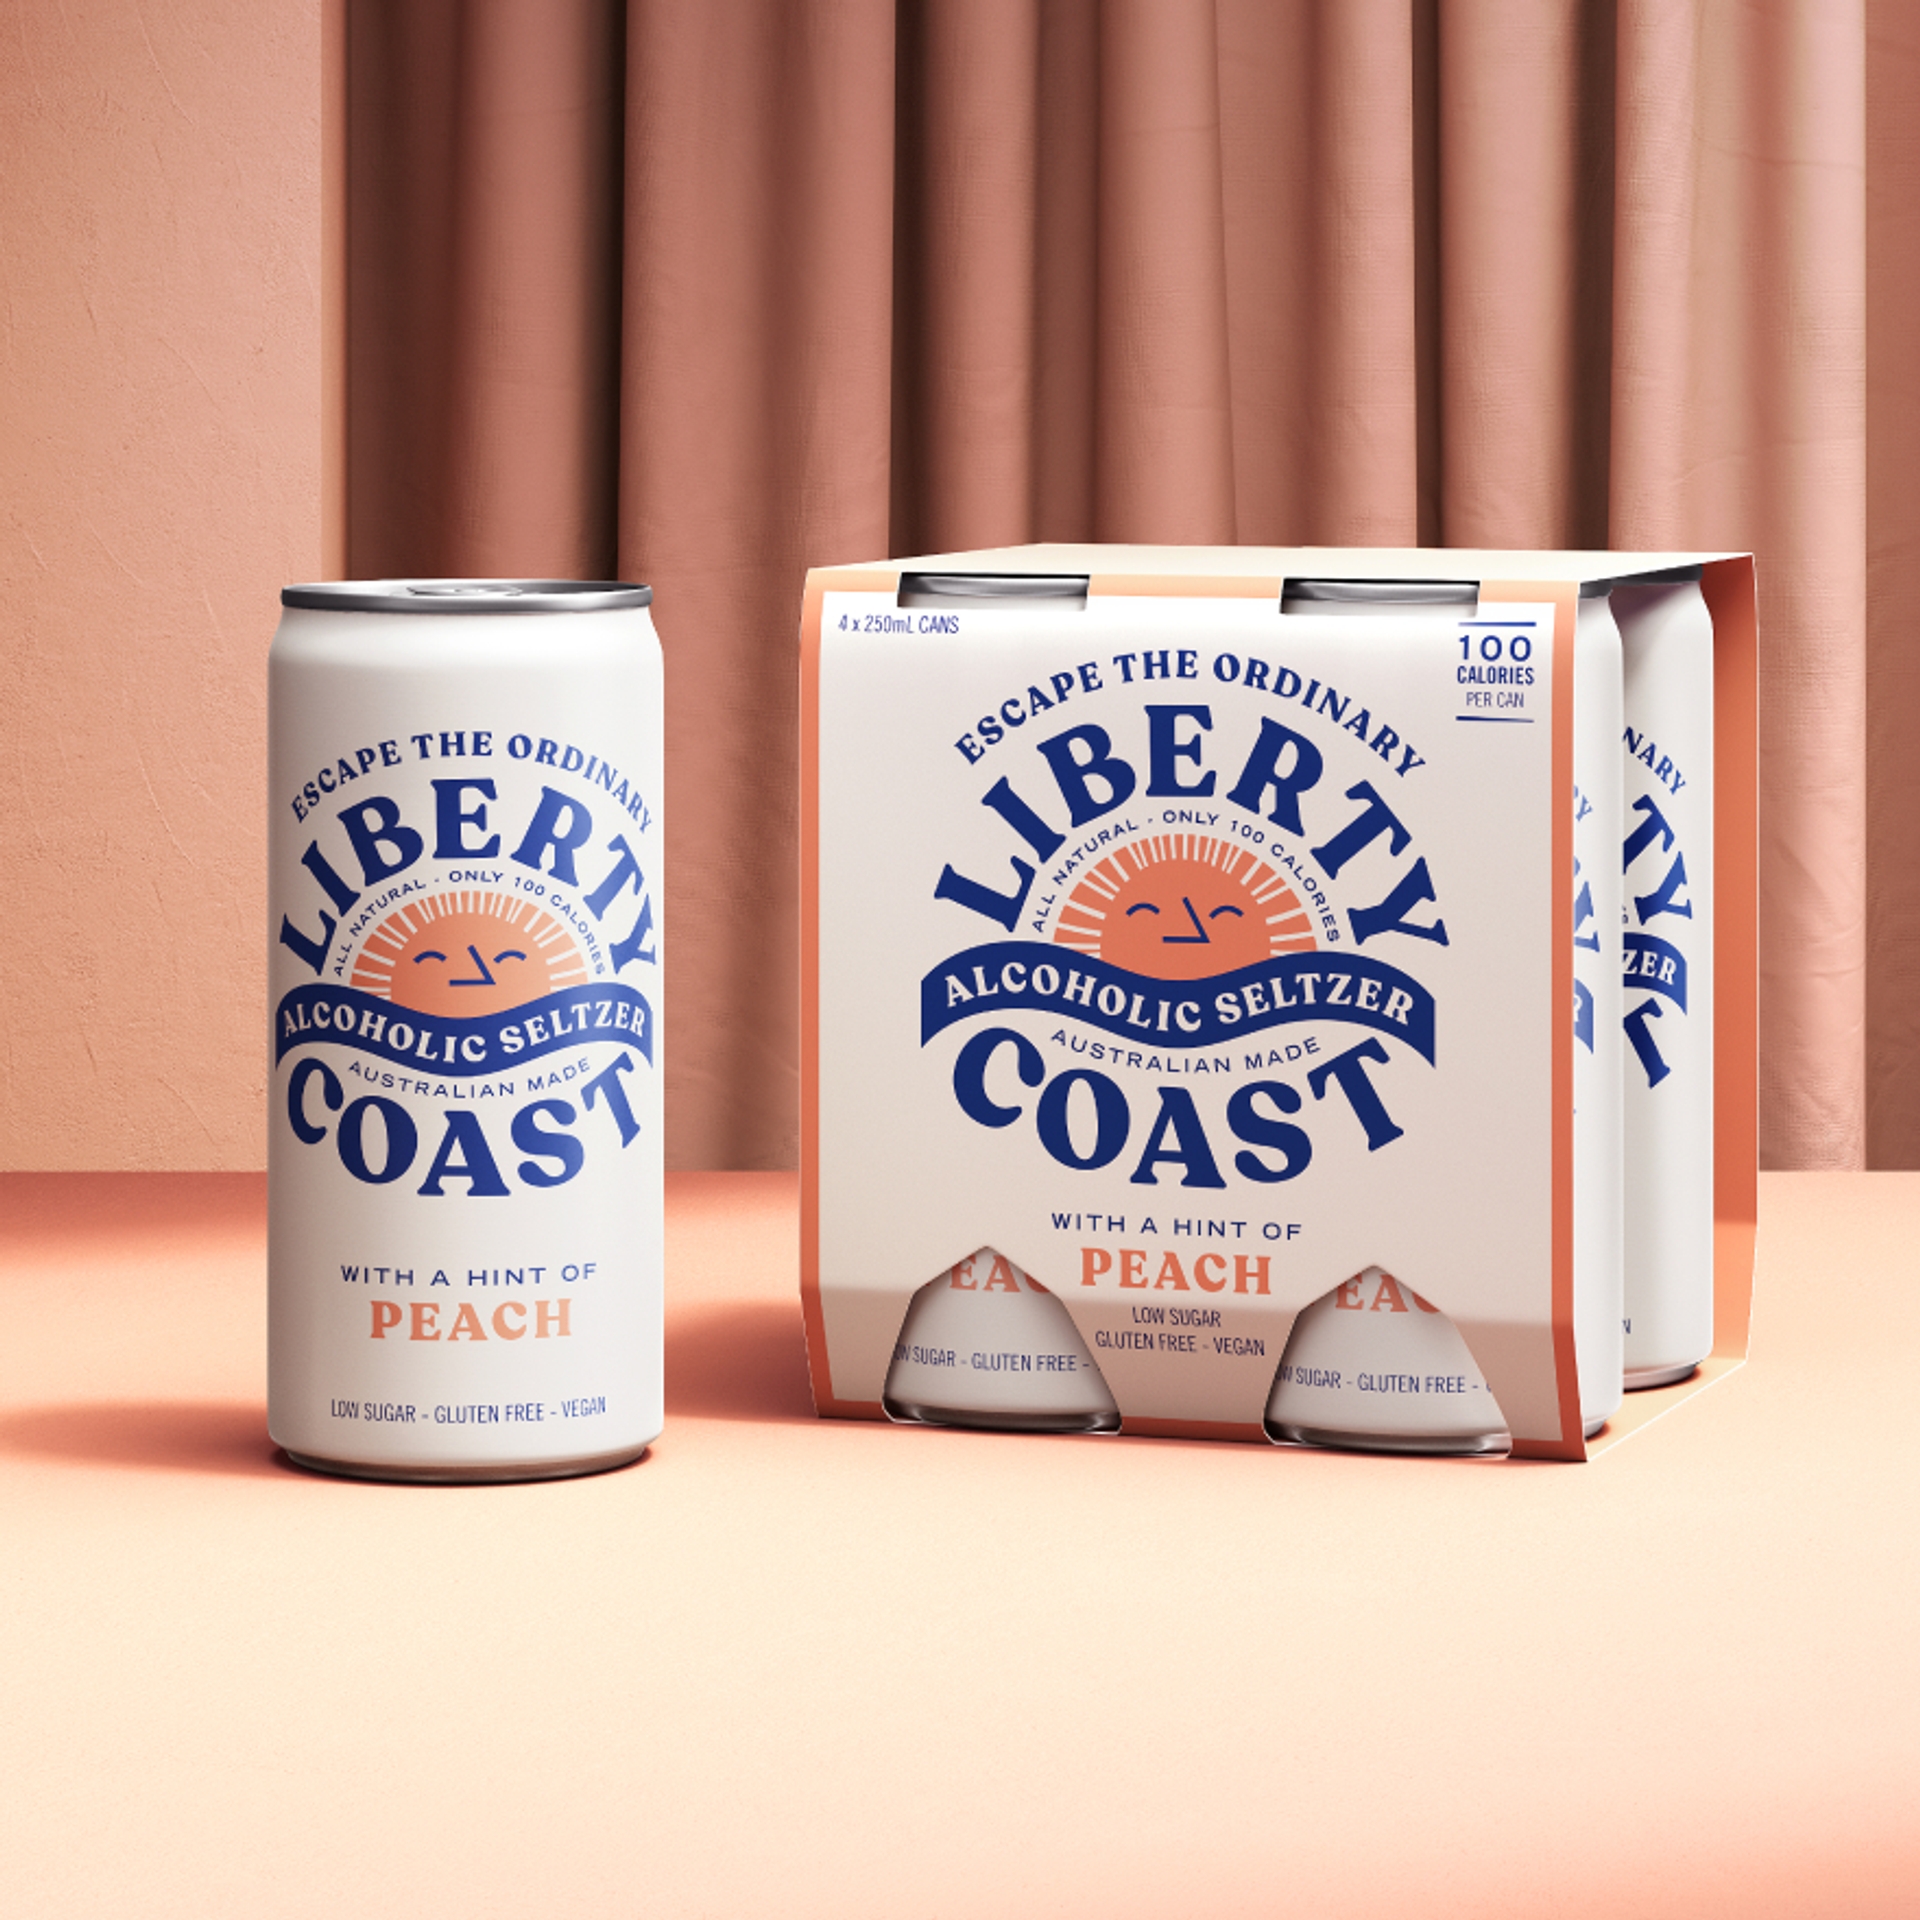 Liberty Coast seltzer packaging design by branding agency Our Revolution for alcoholic seltzer brand Liberty Coast in front of a light peach curtain